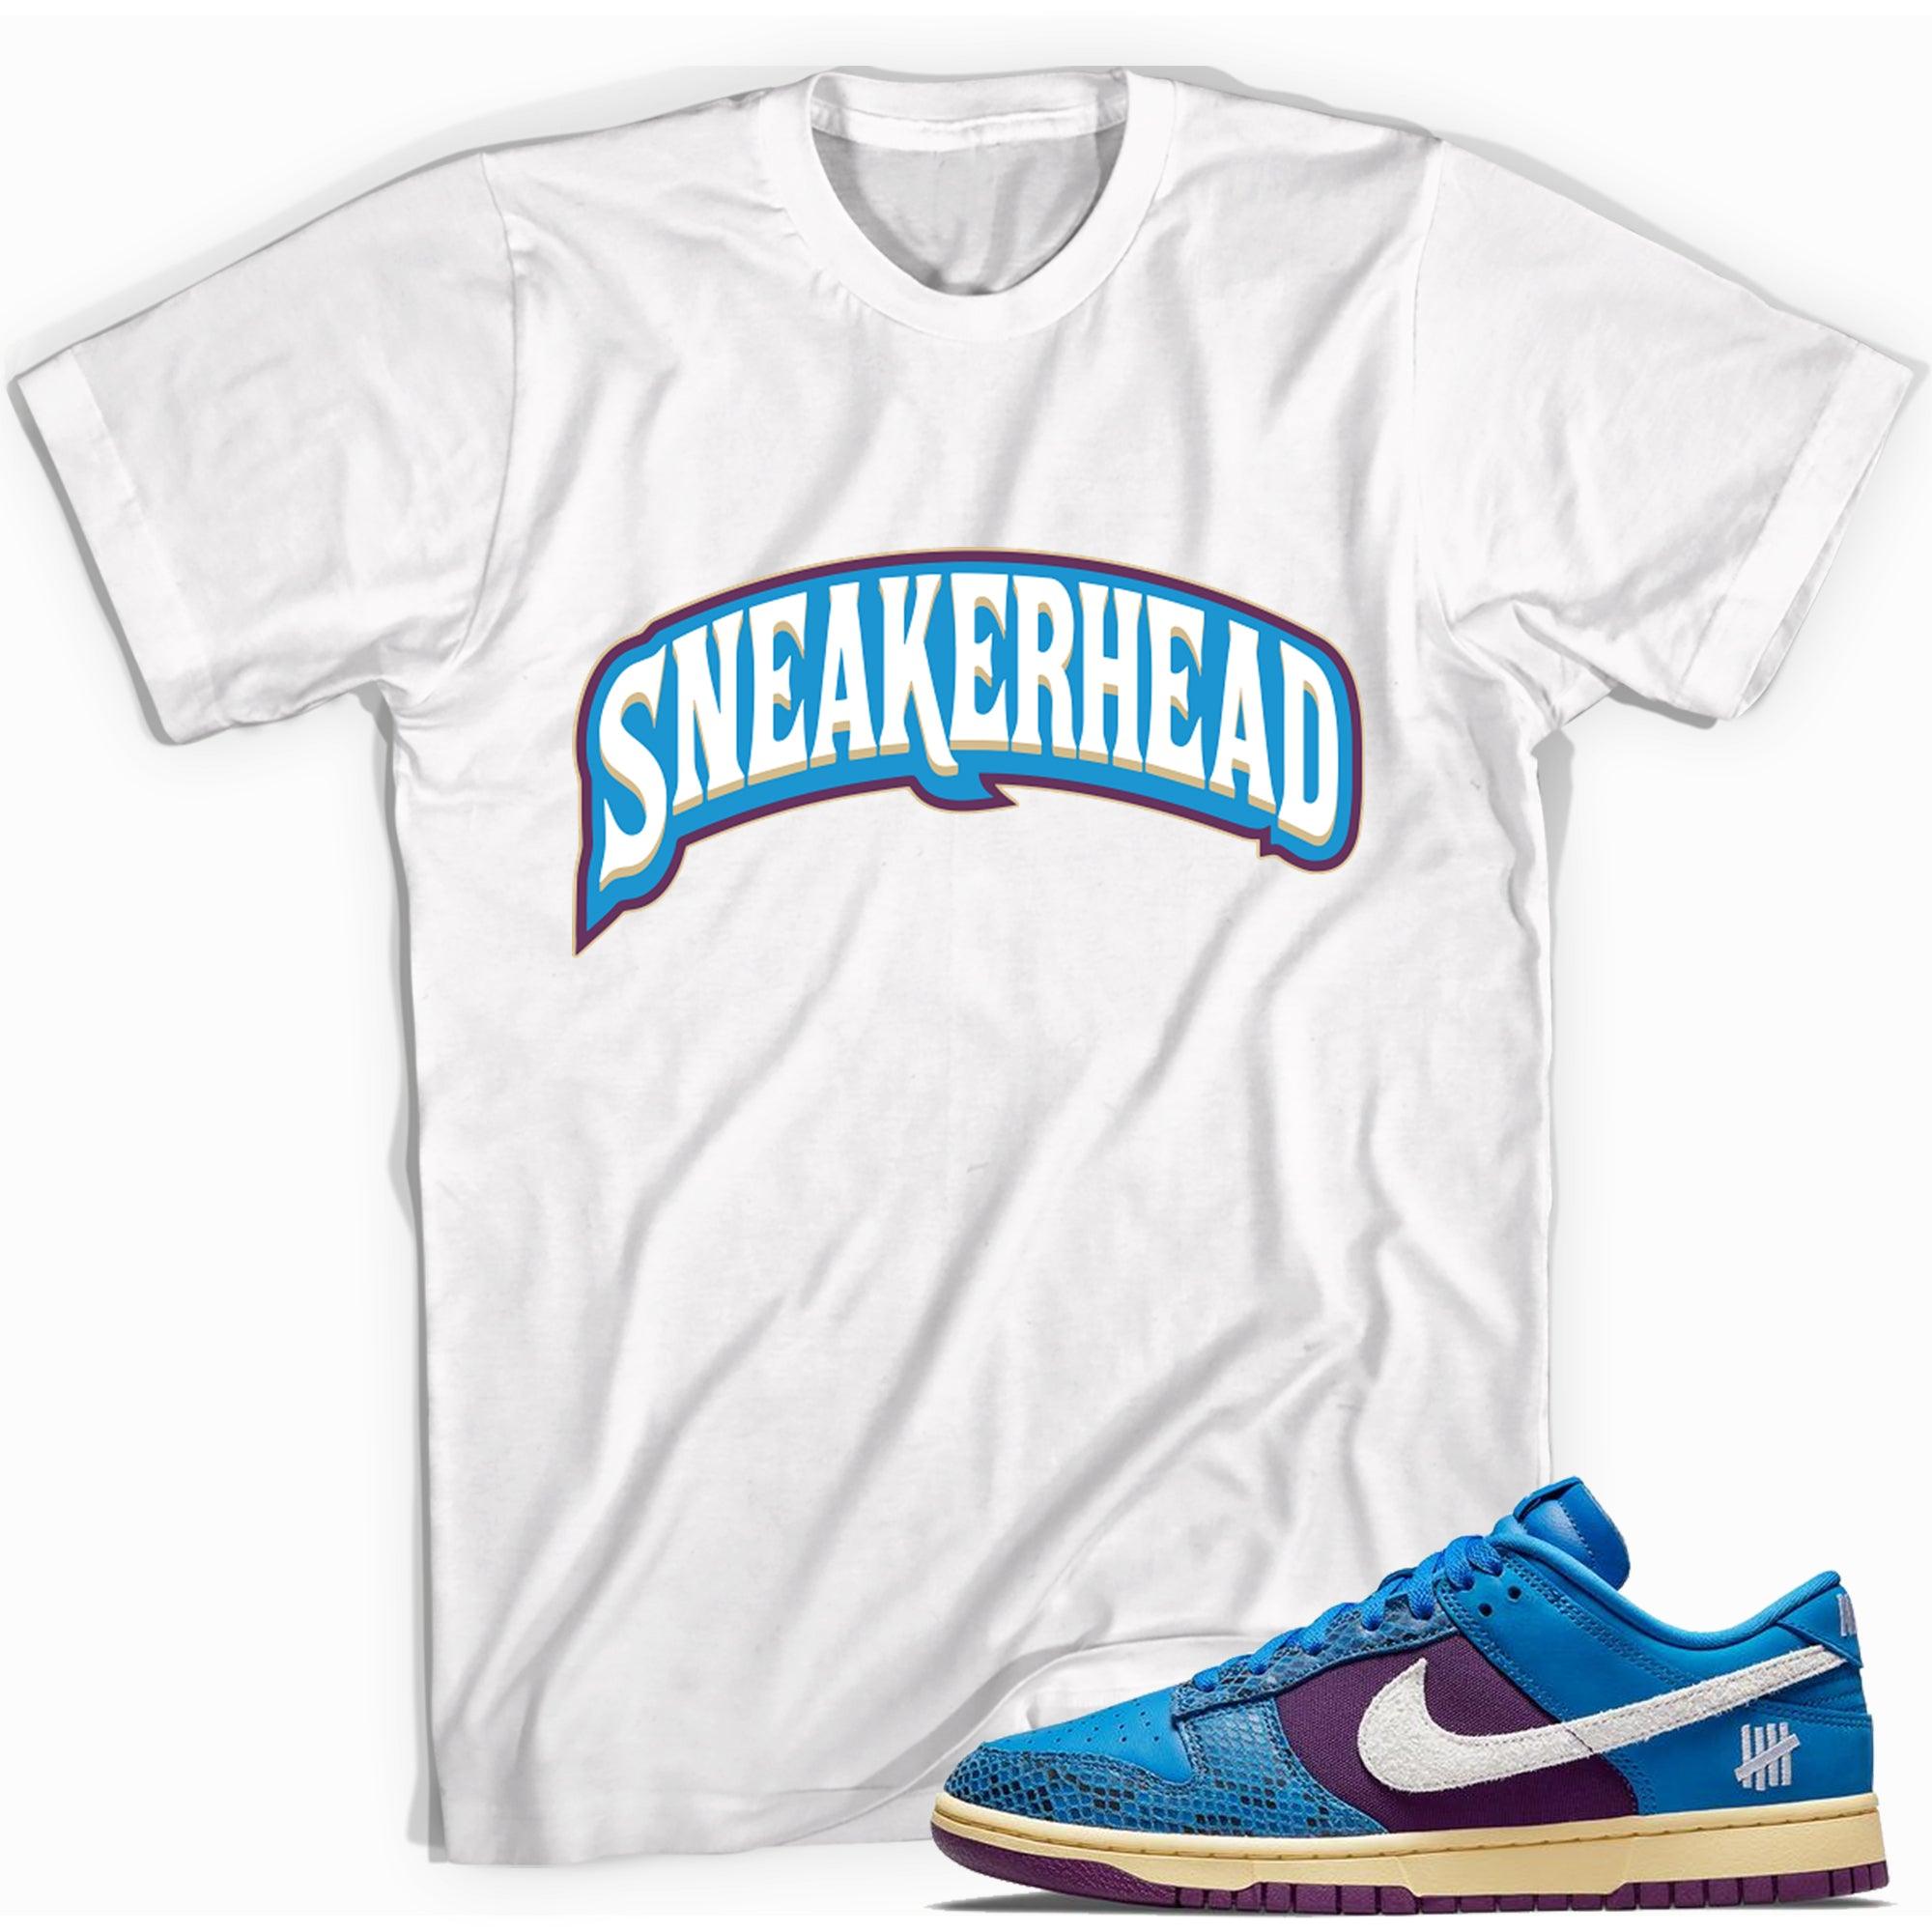 Sneakerhead Shirt Dunk Low Undefeated 5 On It Dunk vs AF1 photo